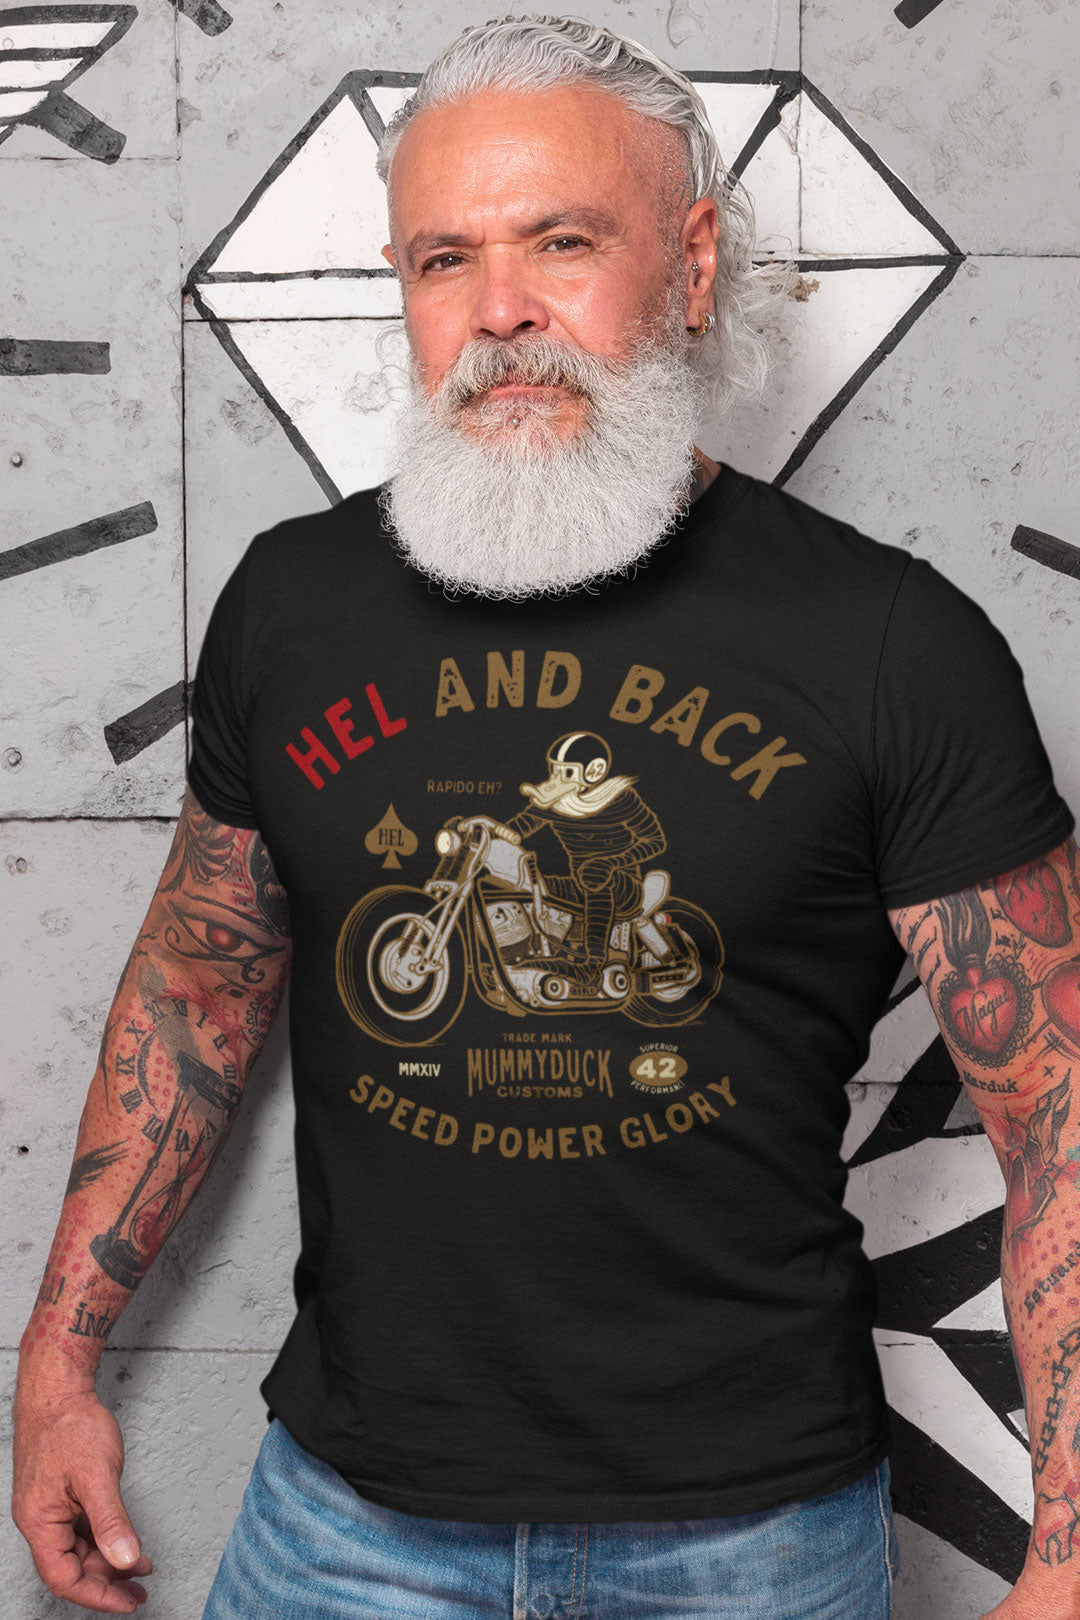 HEL and back motorcycle t-shirt. Mummy rider with his HD. He bows power and speed. He’s fast if needed. Otherwise, he just rides HEL and back if he pleases.